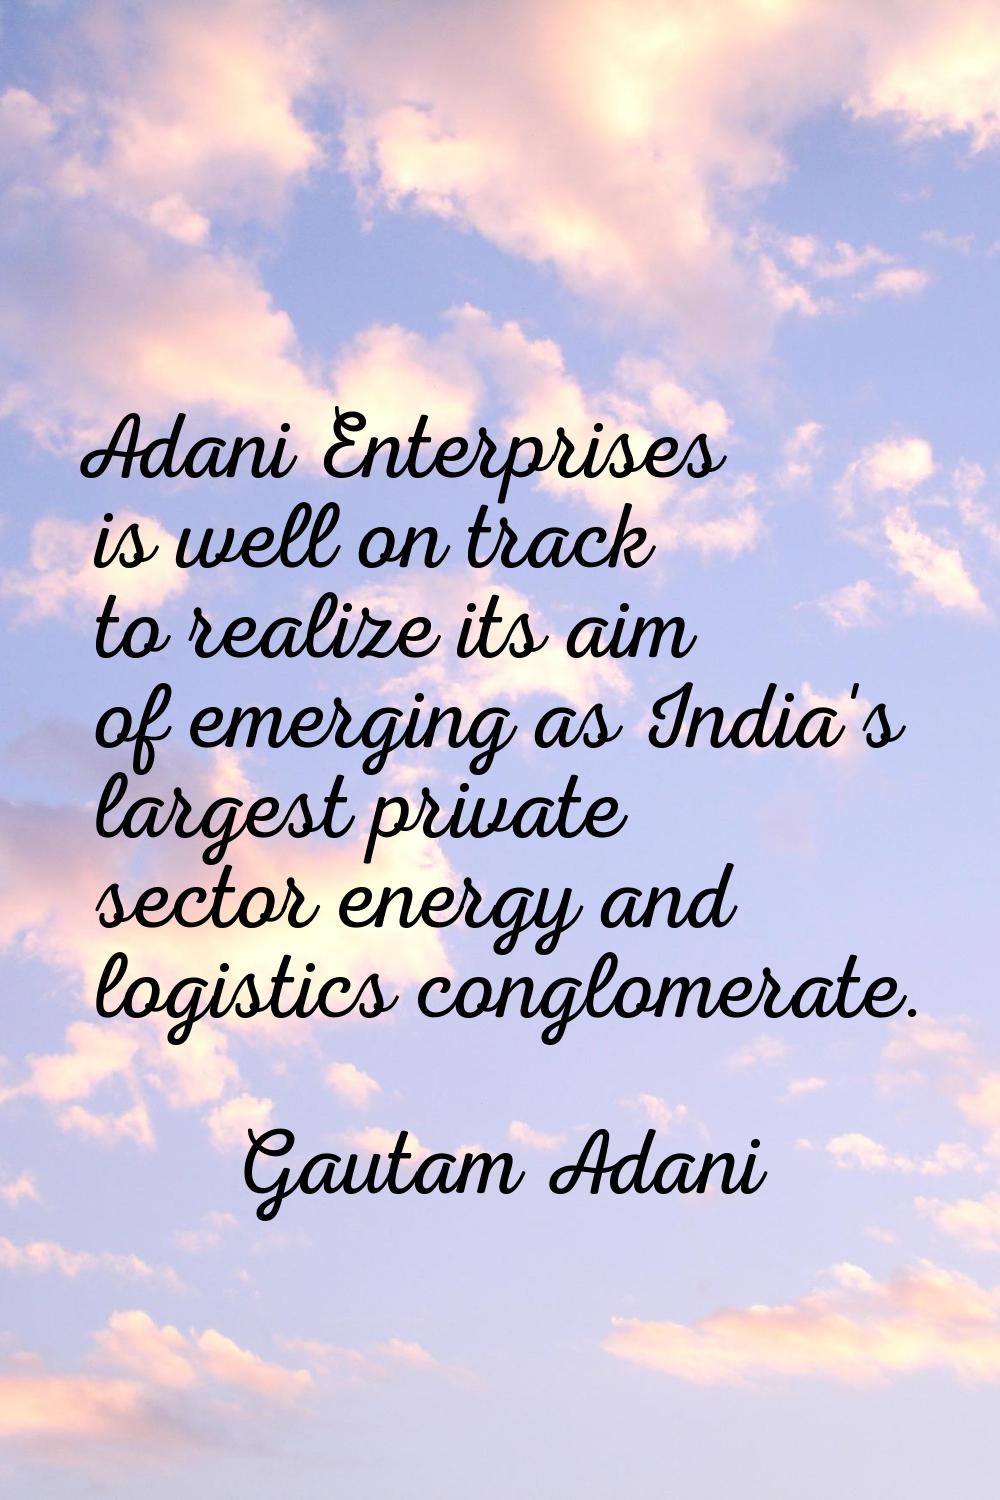 Adani Enterprises is well on track to realize its aim of emerging as India's largest private sector